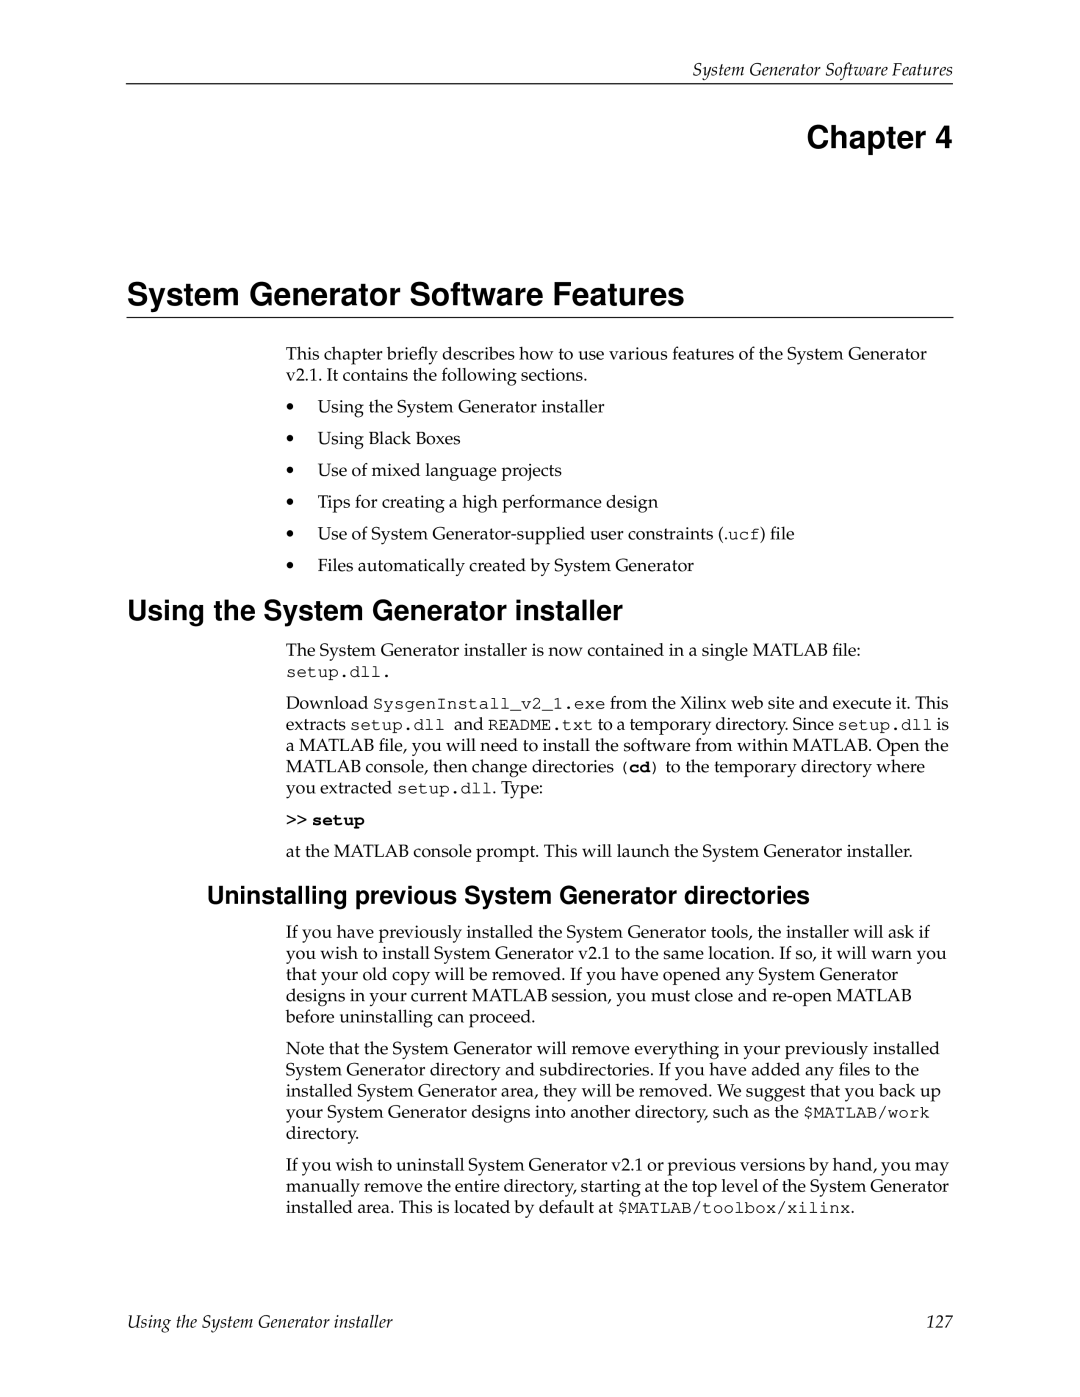 Xilinx V2.1 manual Chapter System Generator Software Features, Using the System Generator installer, >>setup 